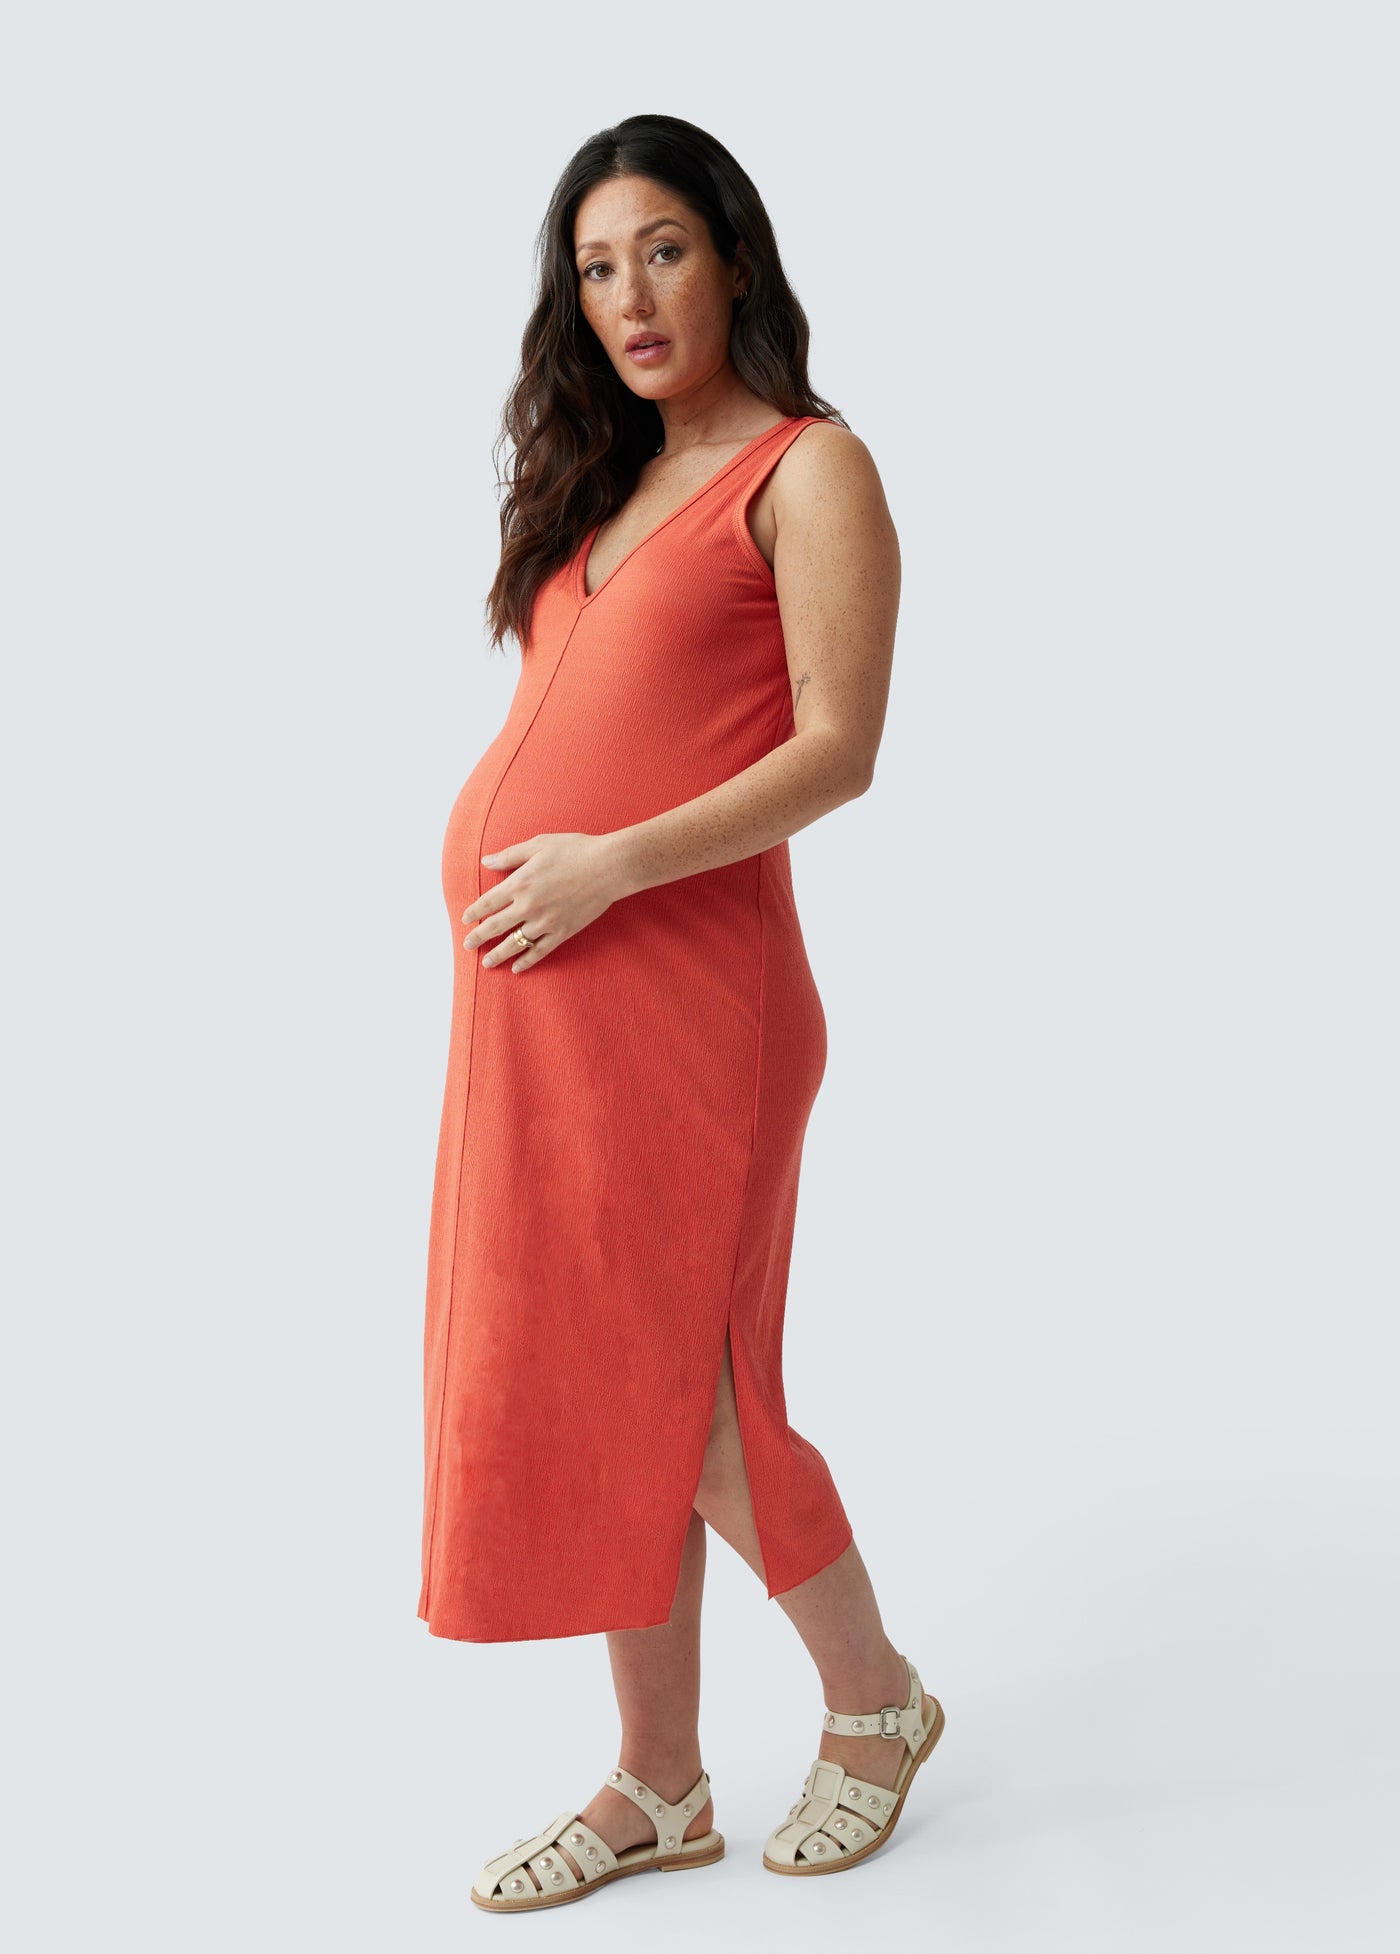 Aylya is 5’6”, 30 weeks pregnant, and wearing size XS||Burnt Sienna